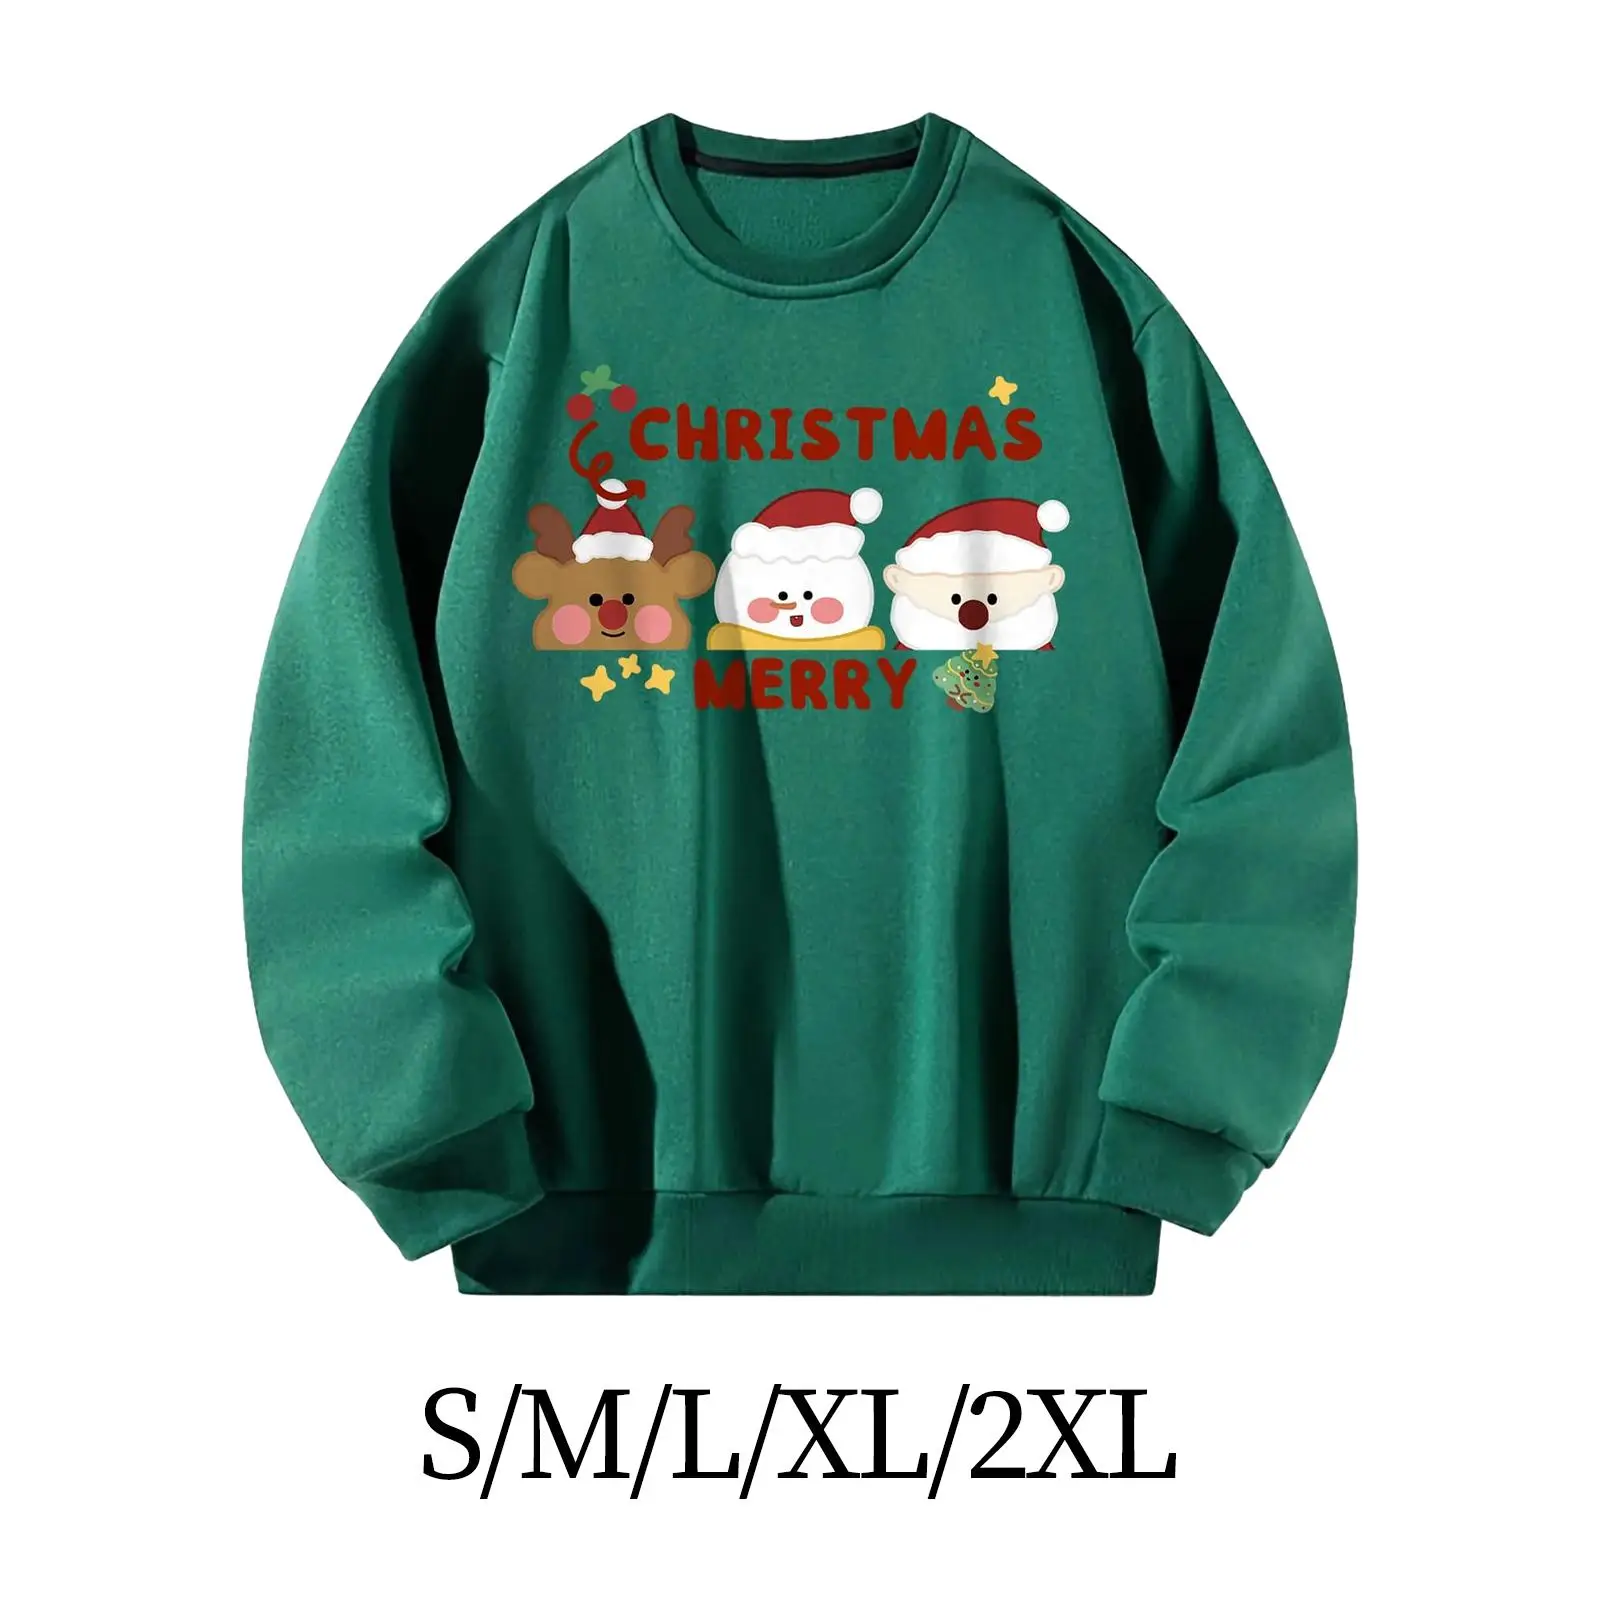 

Women Crewneck Sweatshirt Cartoon Green Merry Christmas Pullover Tops Crew Neck for Autumn Daily Going Out Shopping Clothing